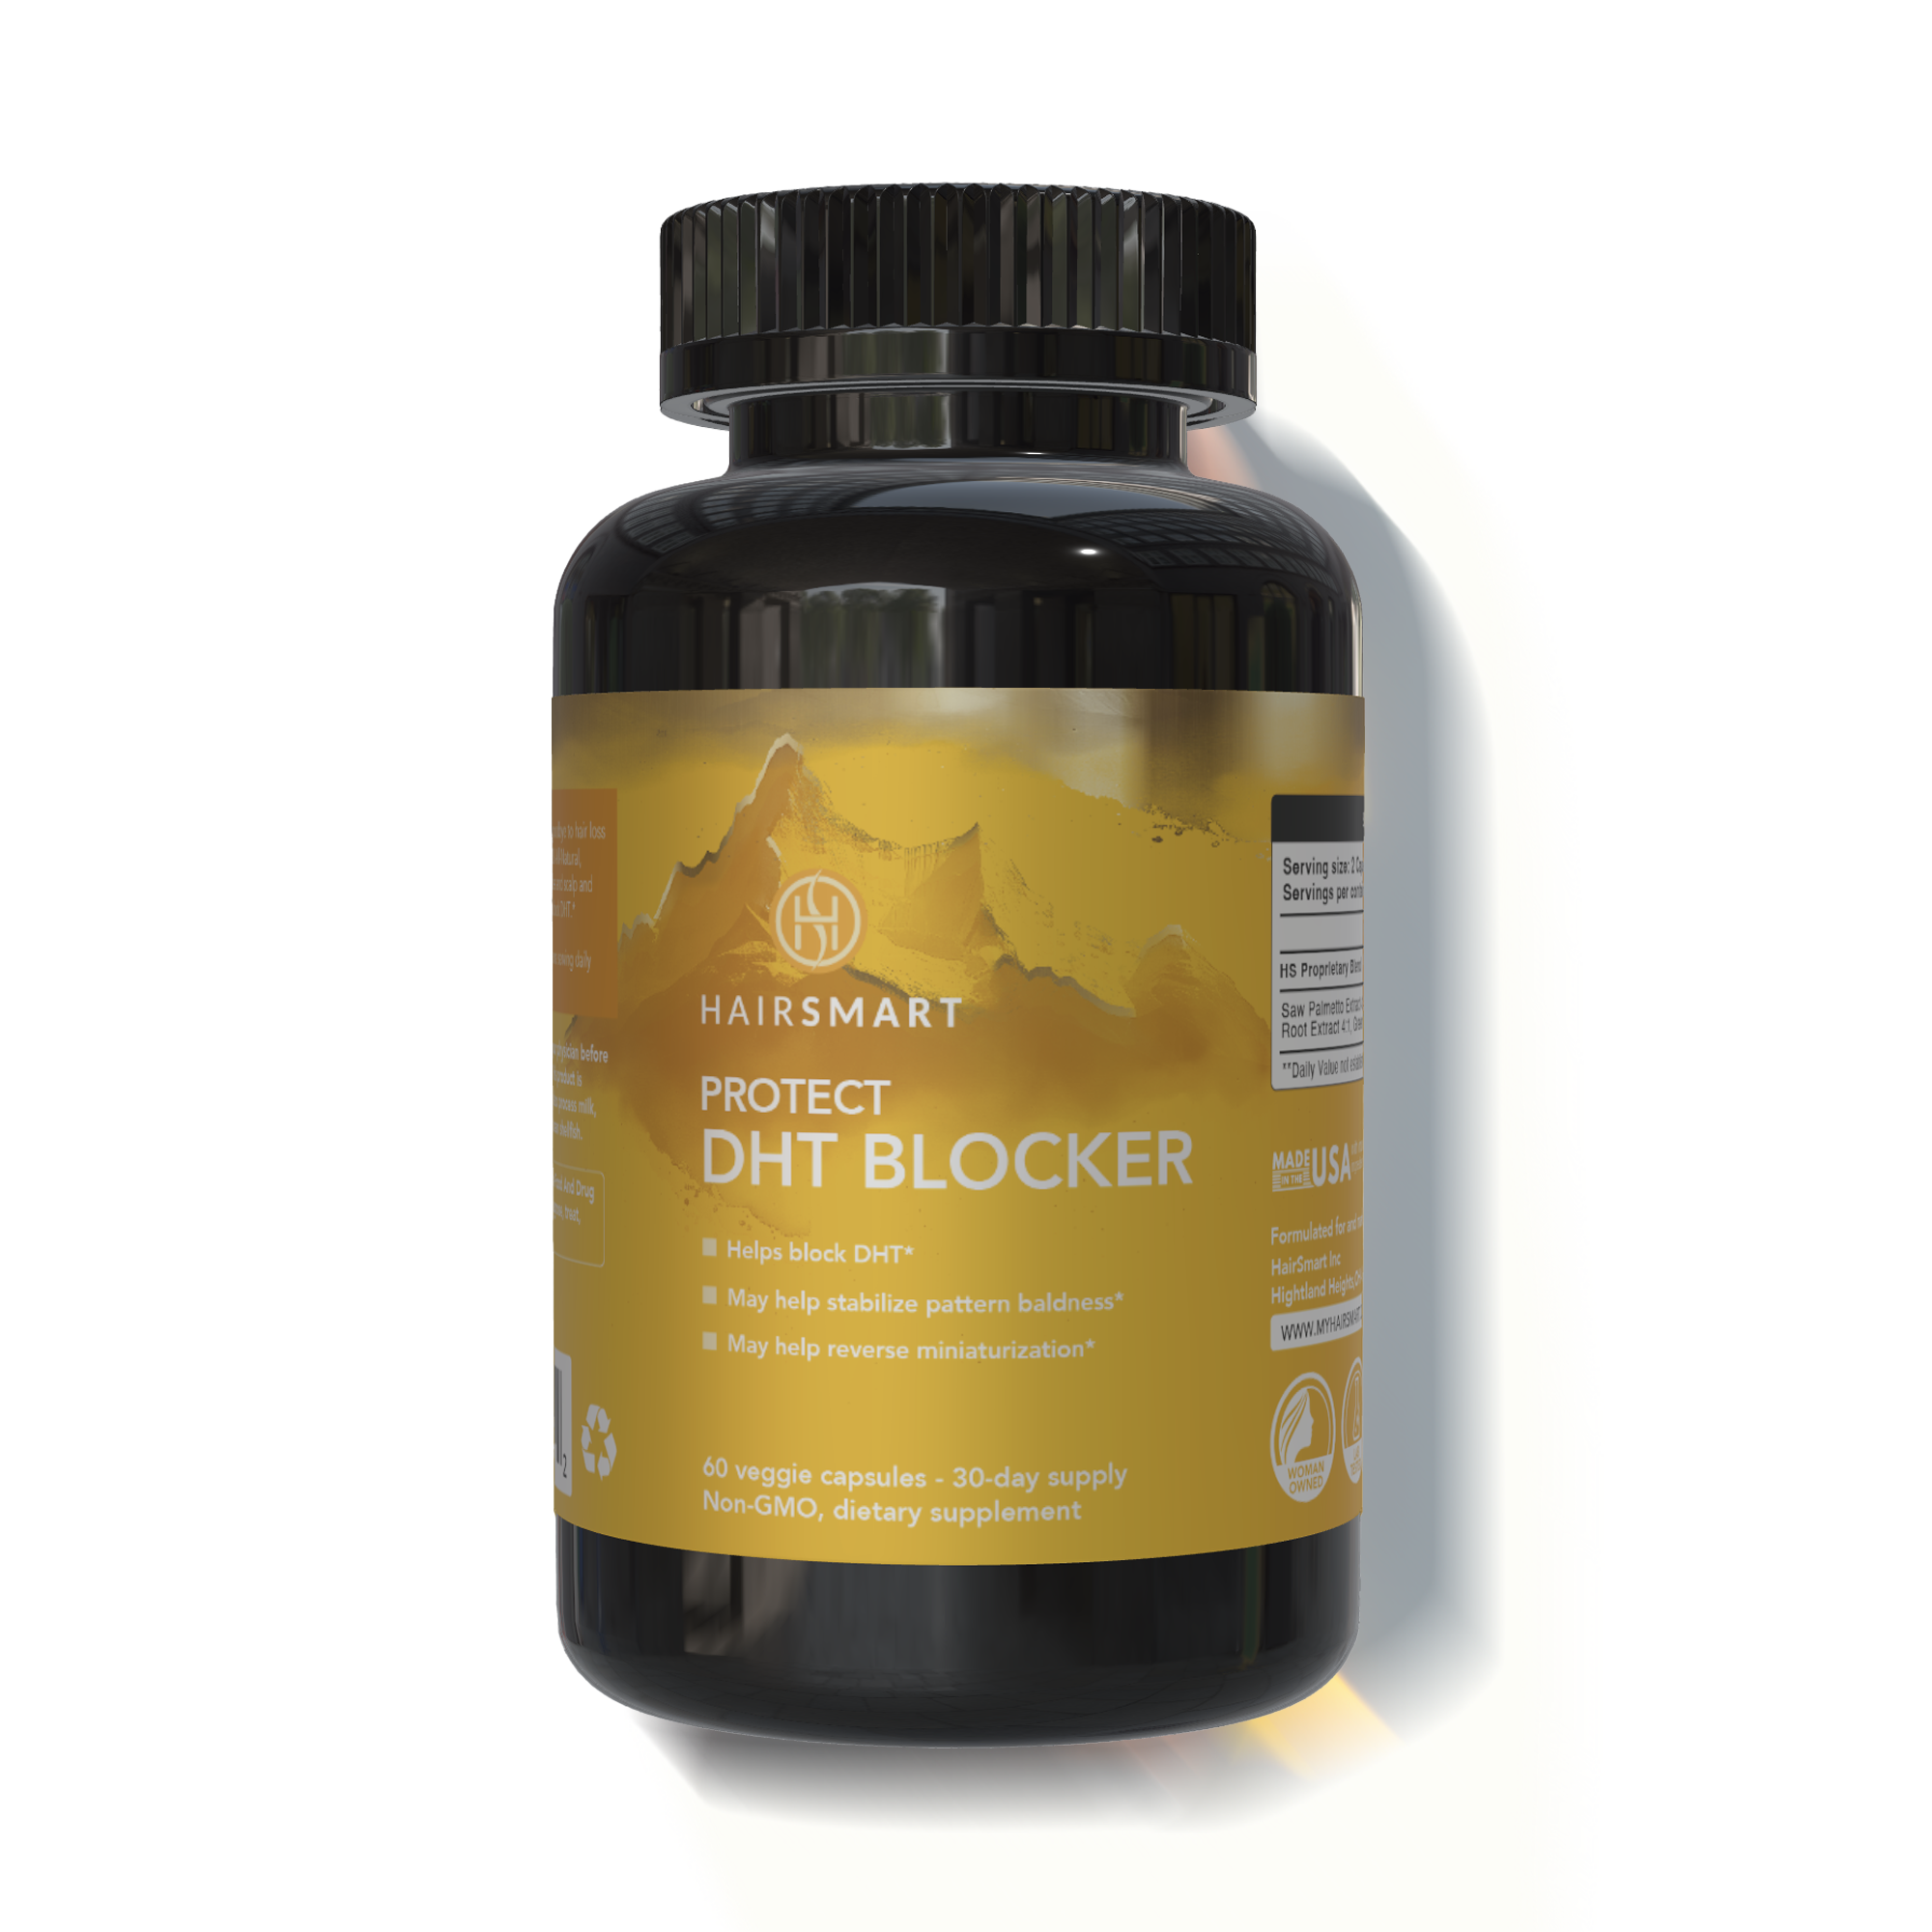 100% Natural DHT BLOCKER - for Male Pattern Hair Loss; 60 Capsules